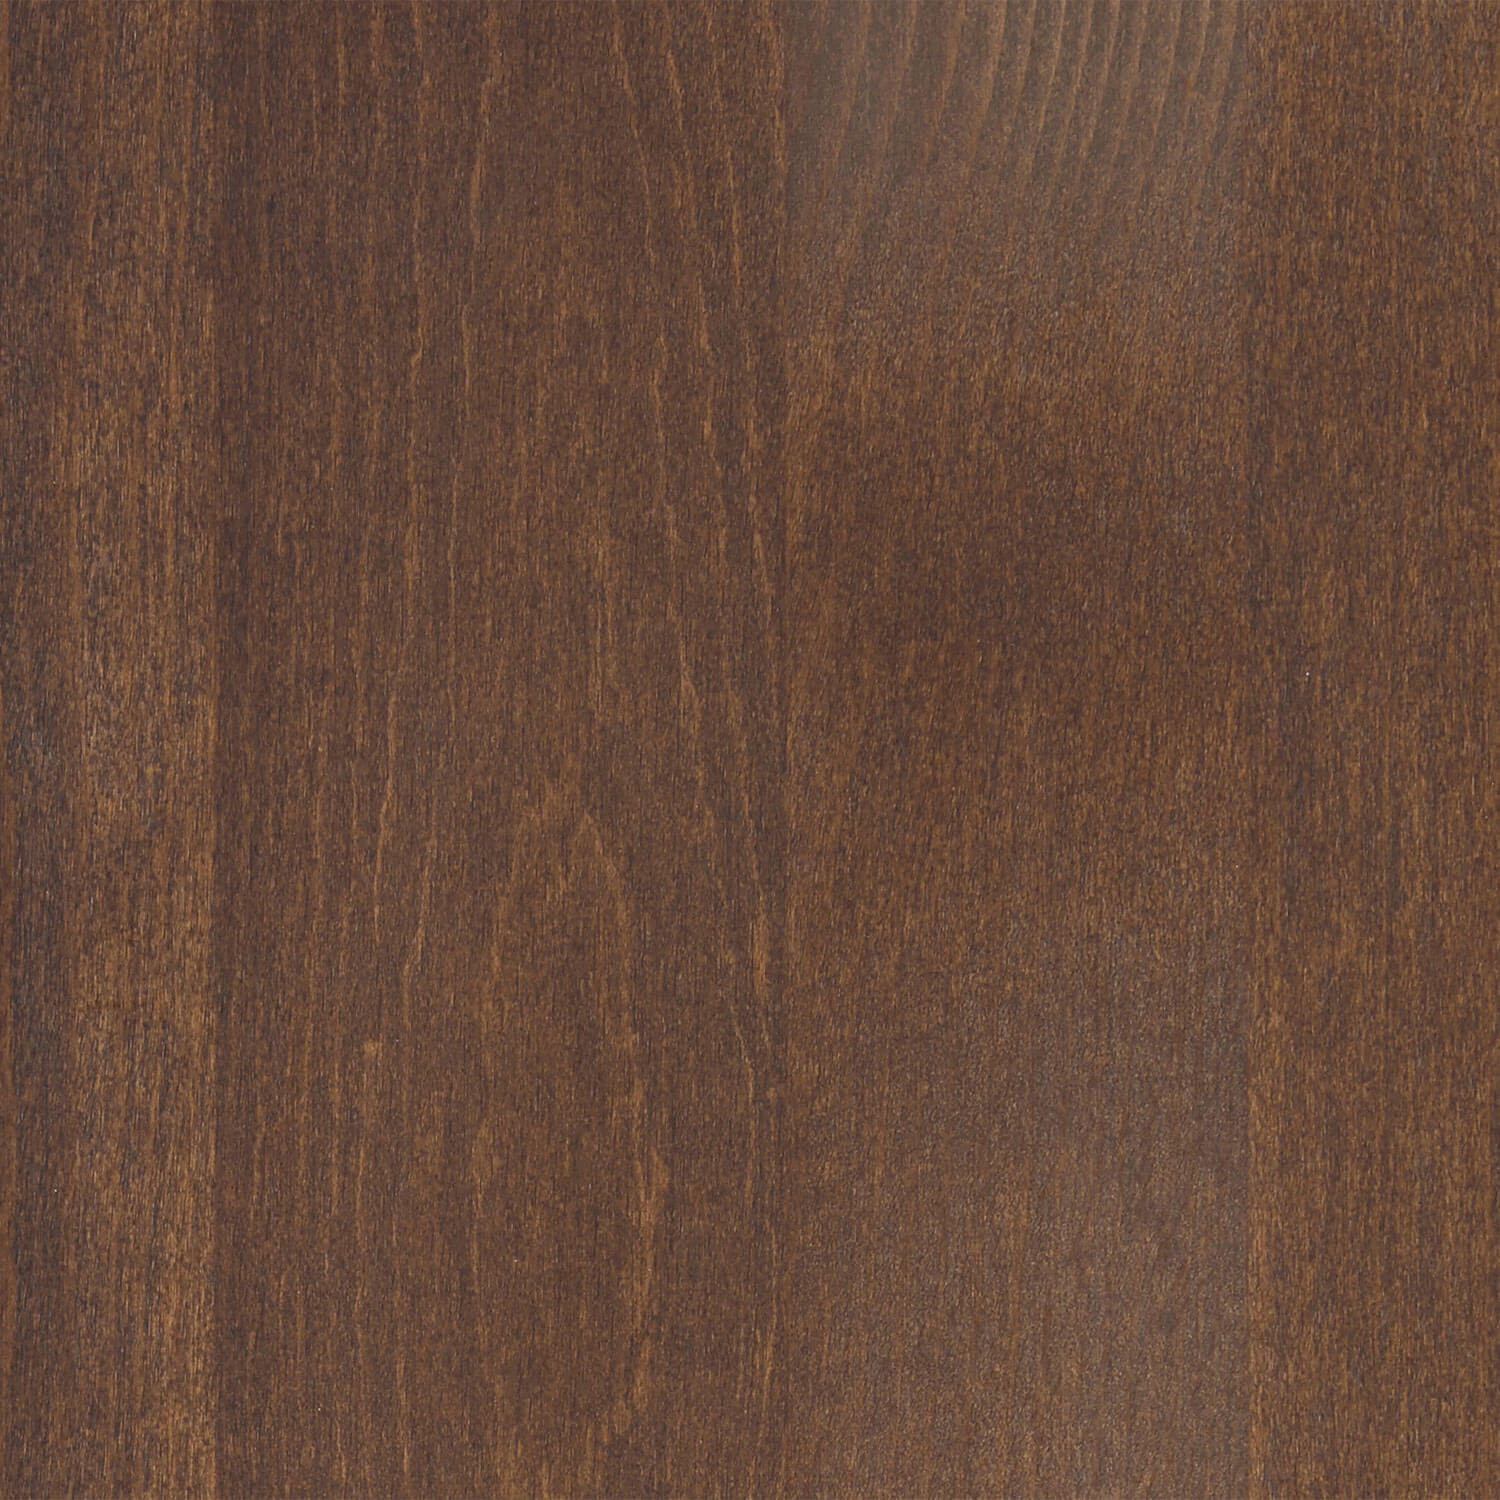 Beech walnut-stained, varnished